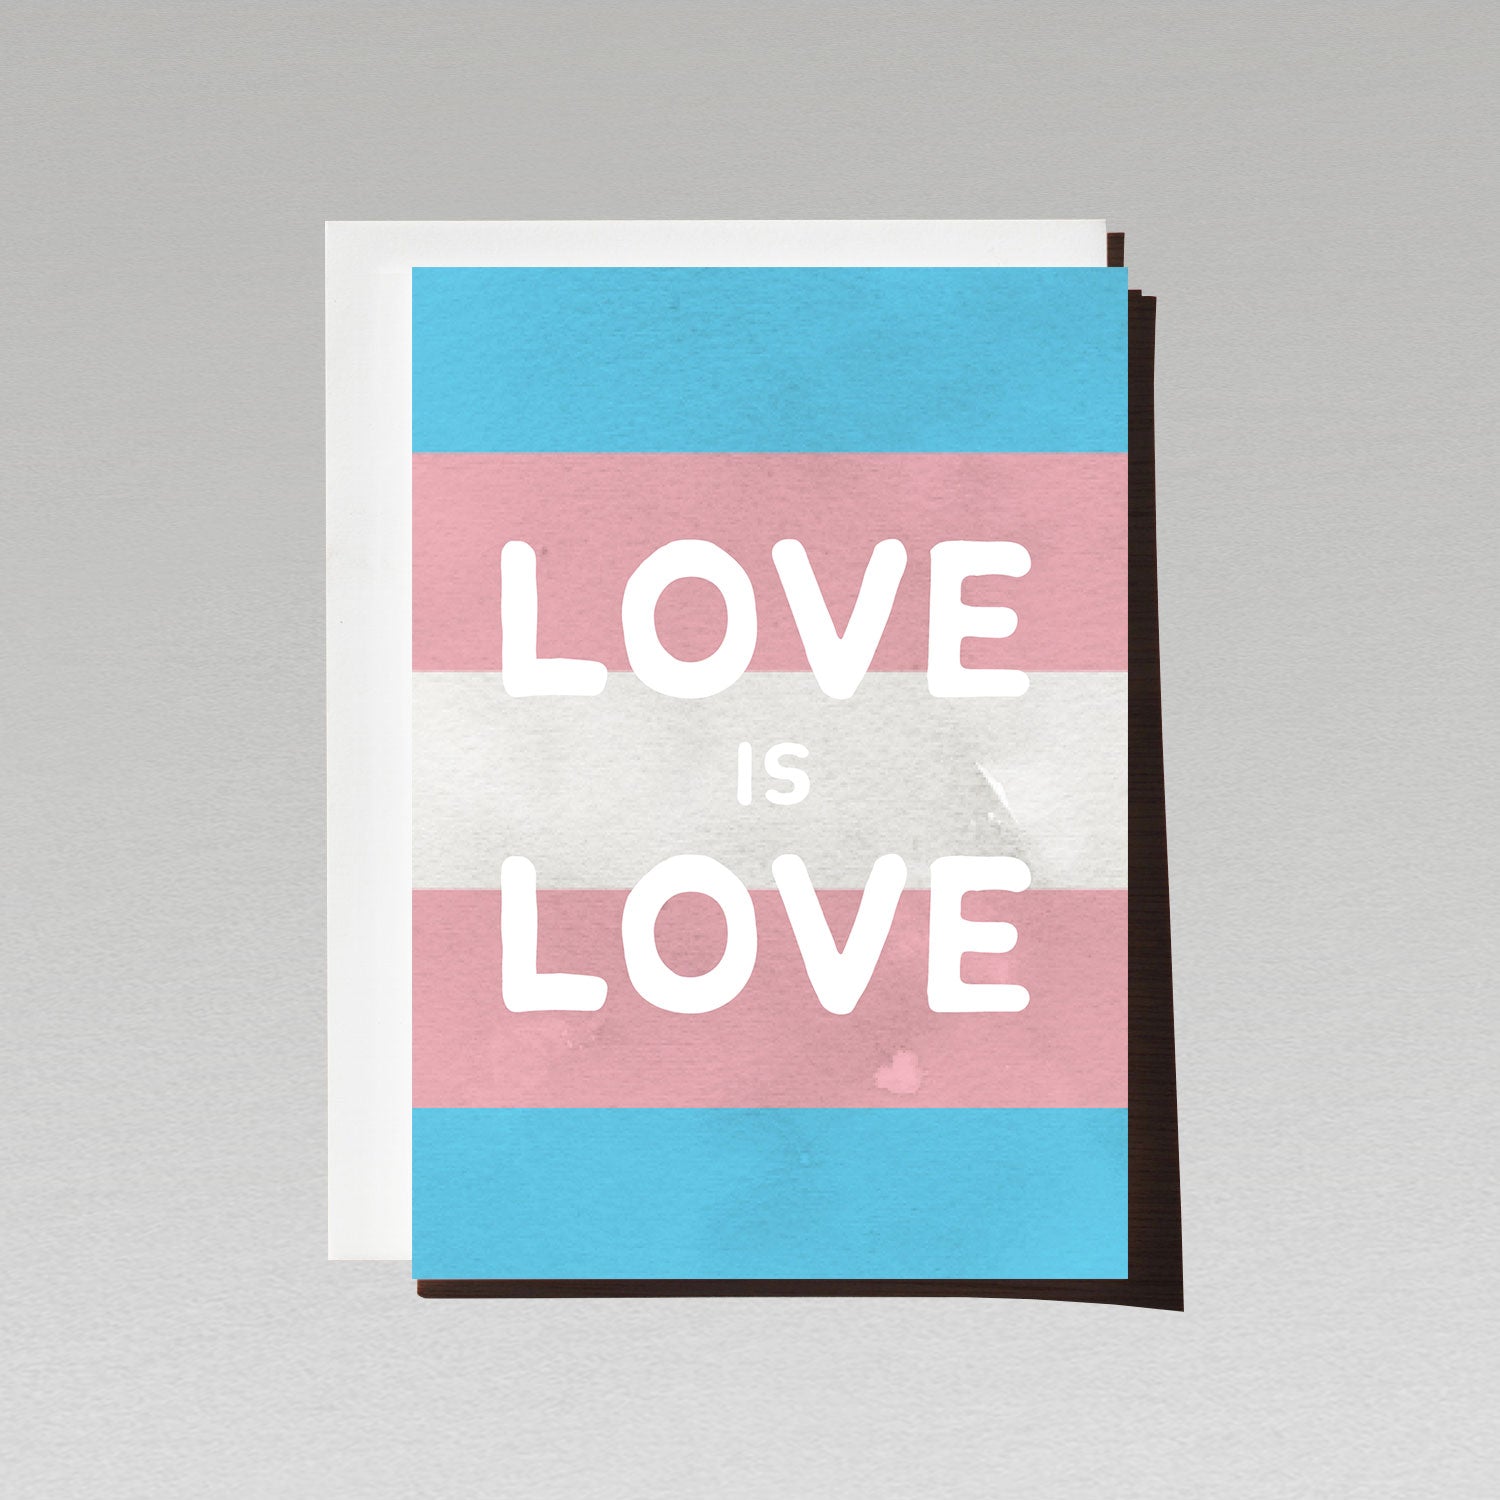 Greeting card with large white text Love is Love on LGBTQI transgender flag background